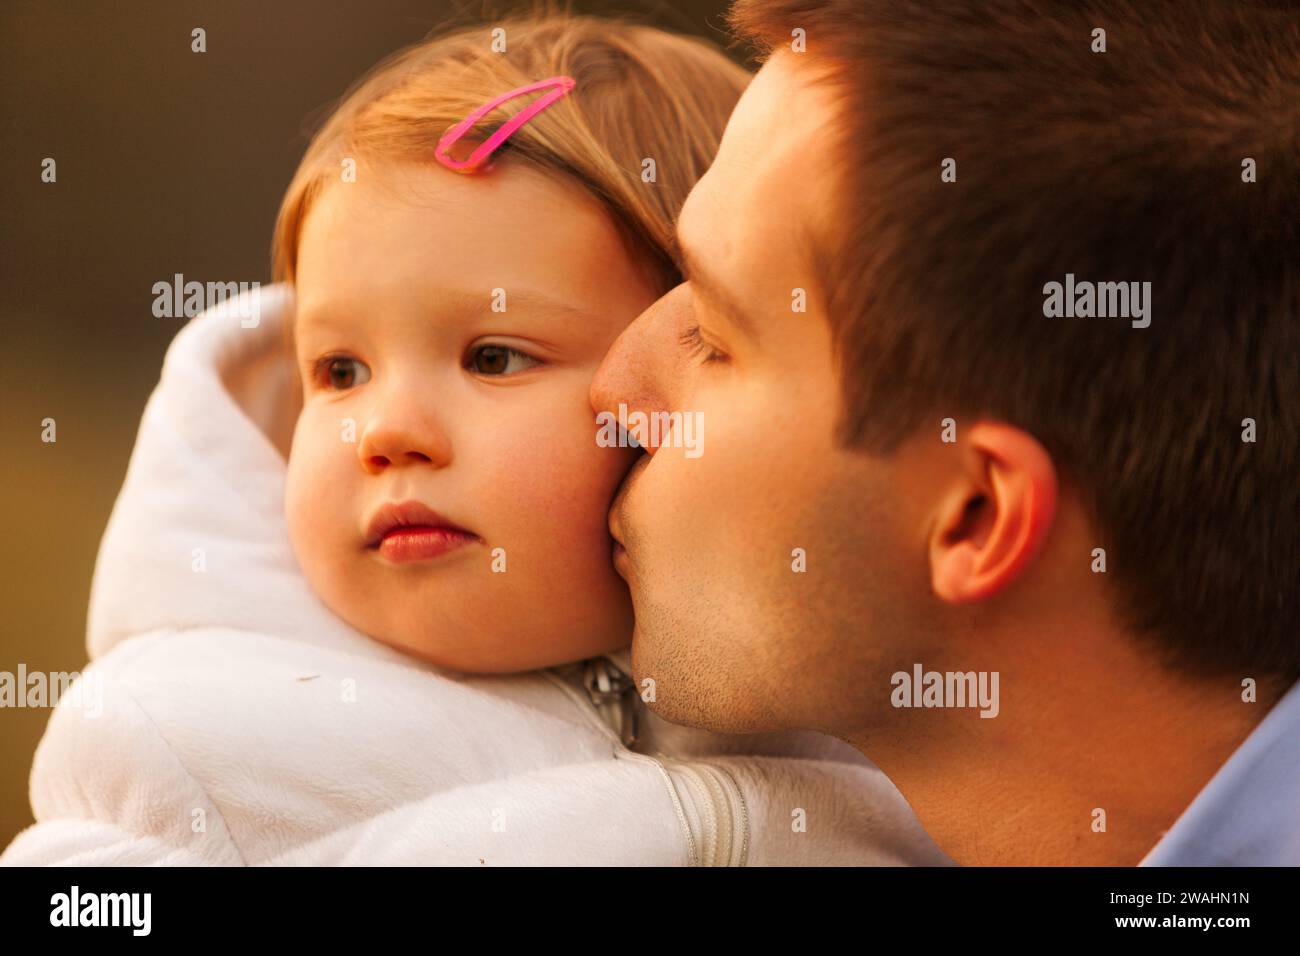 With a gentle kiss on the cheek, the father cherishes a quiet moment with his contemplative young daughter Stock Photo